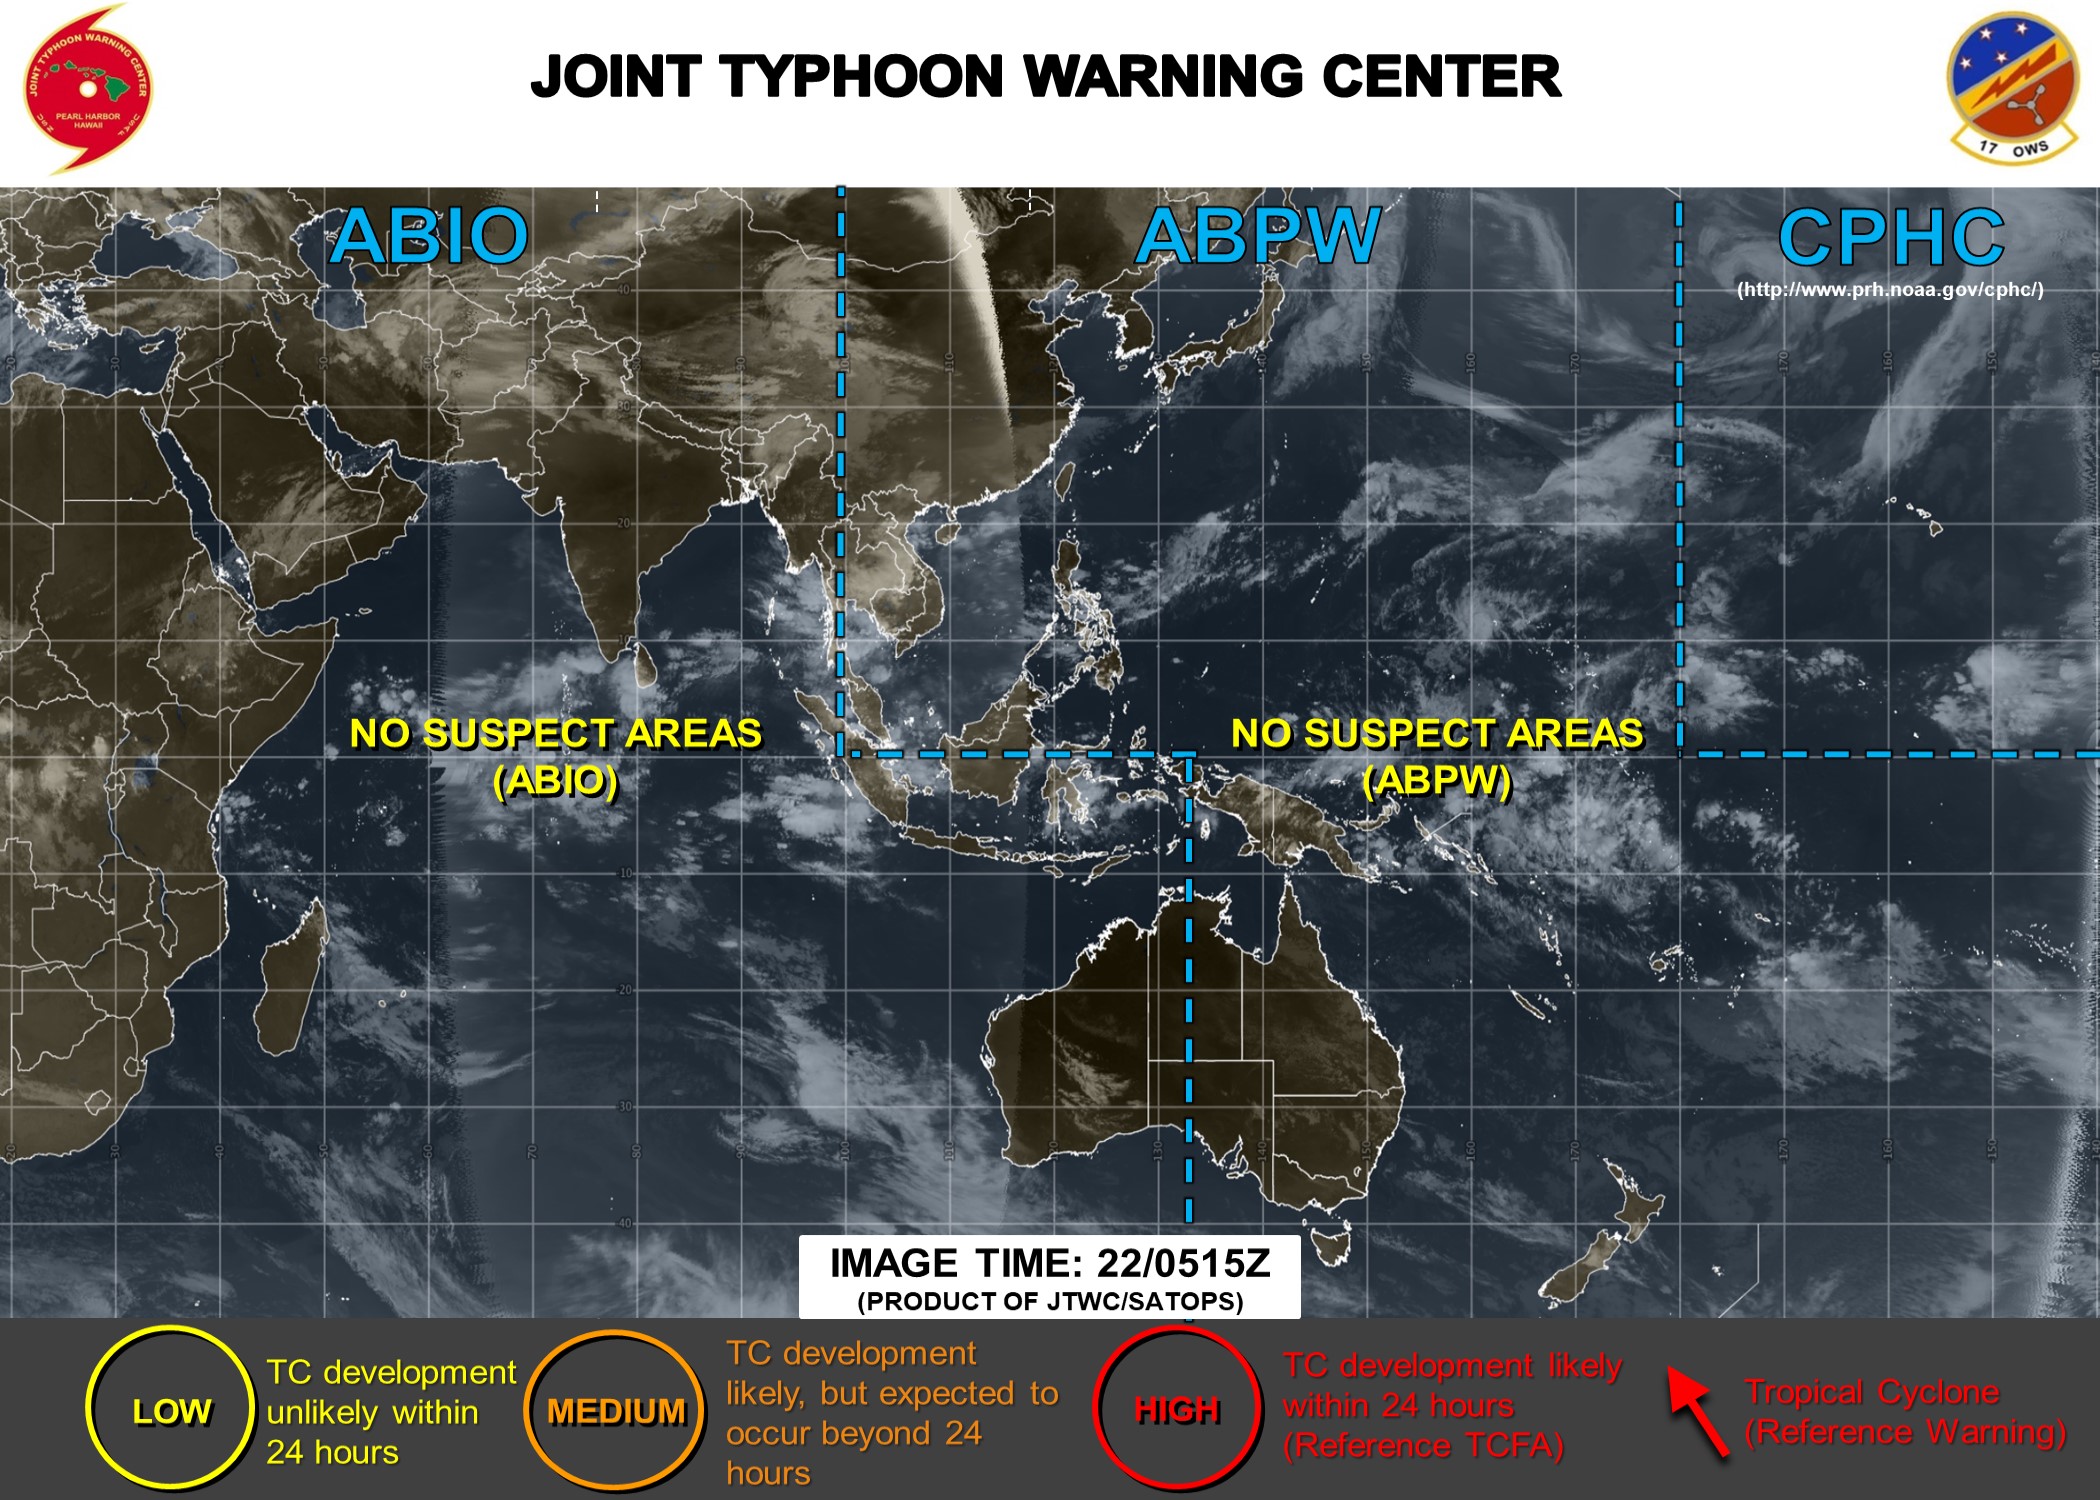 20190522: tropical cyclone formation possible across the Eastern North Pacific next 2 weeks. Likely calm elsewhere